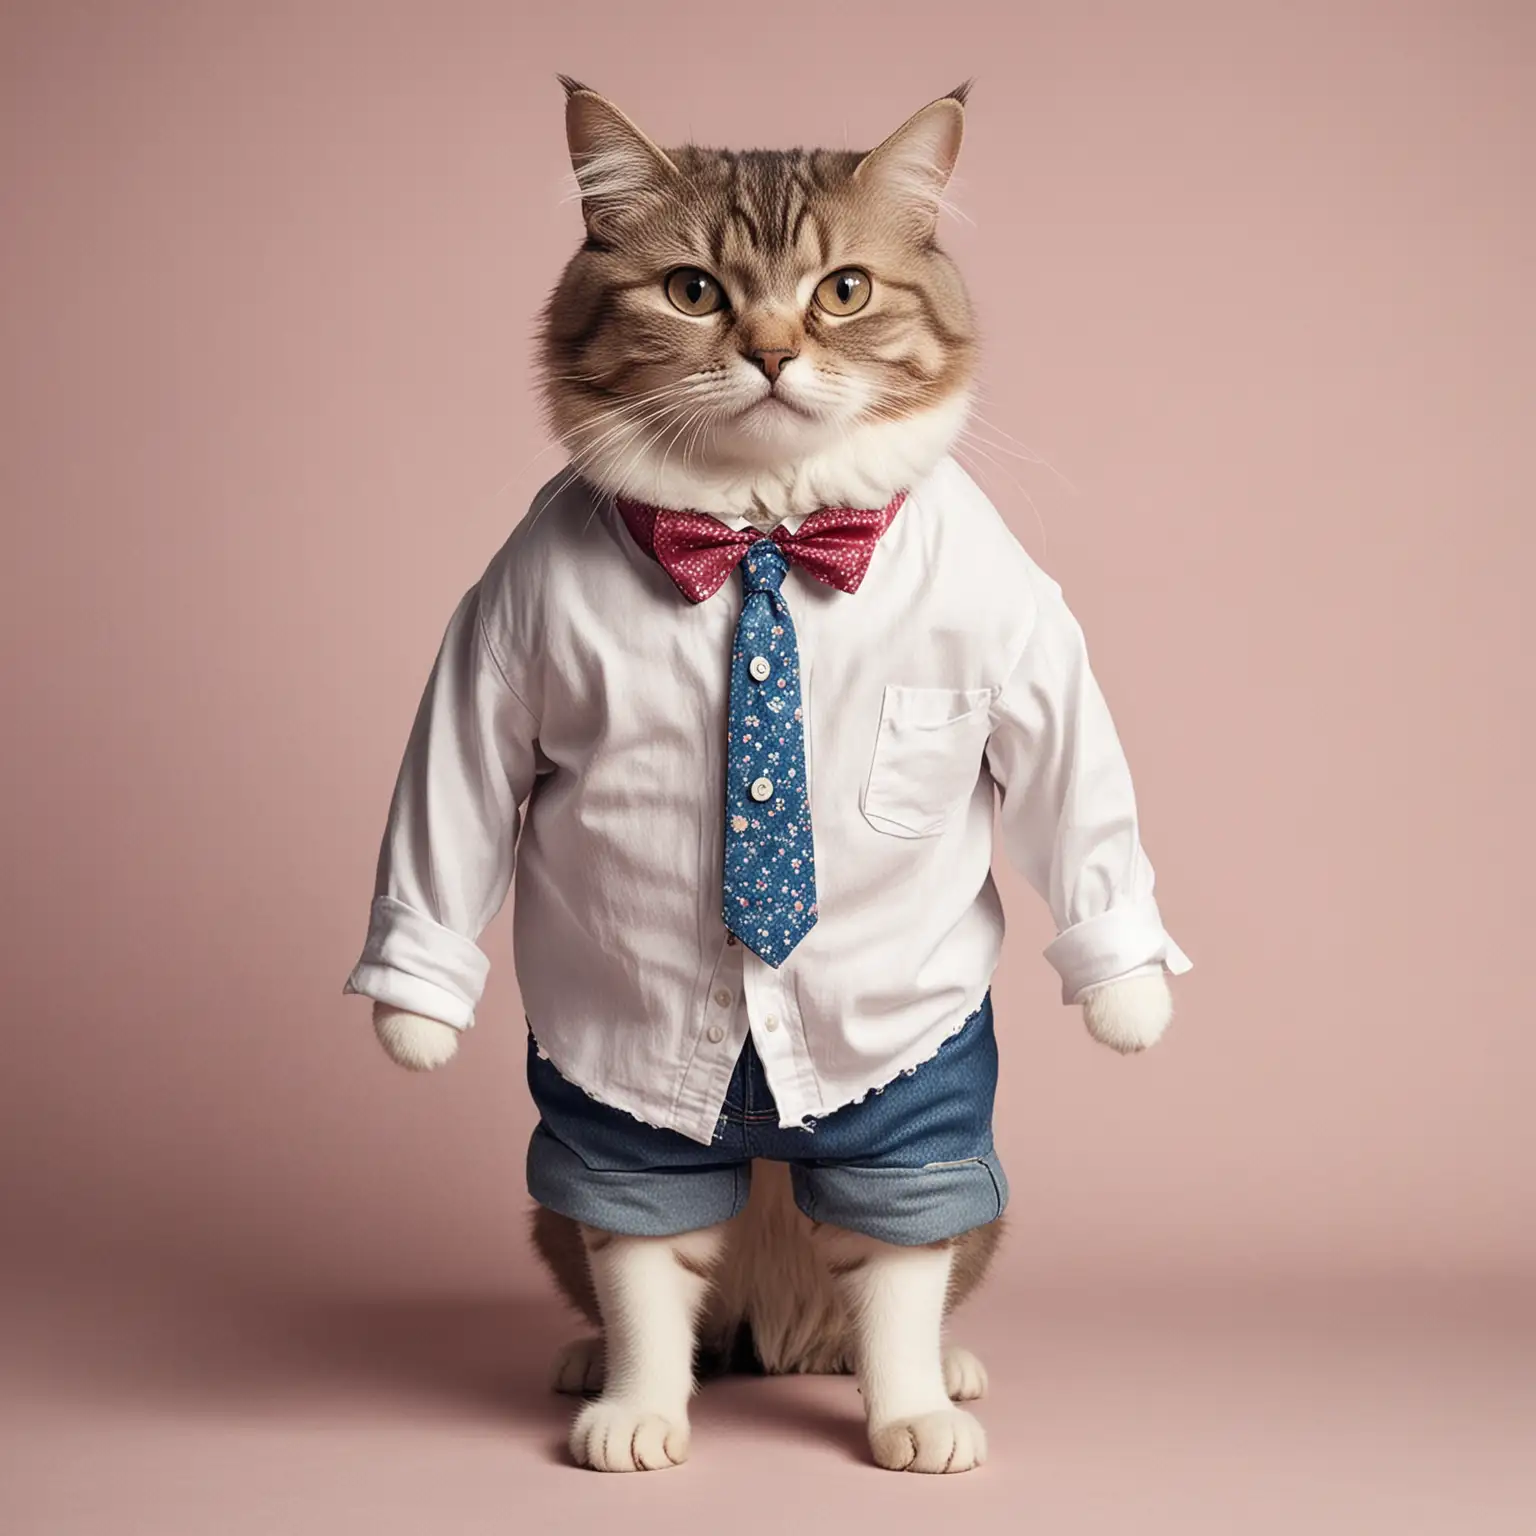 Fashionable Cat in Stylish Outfit